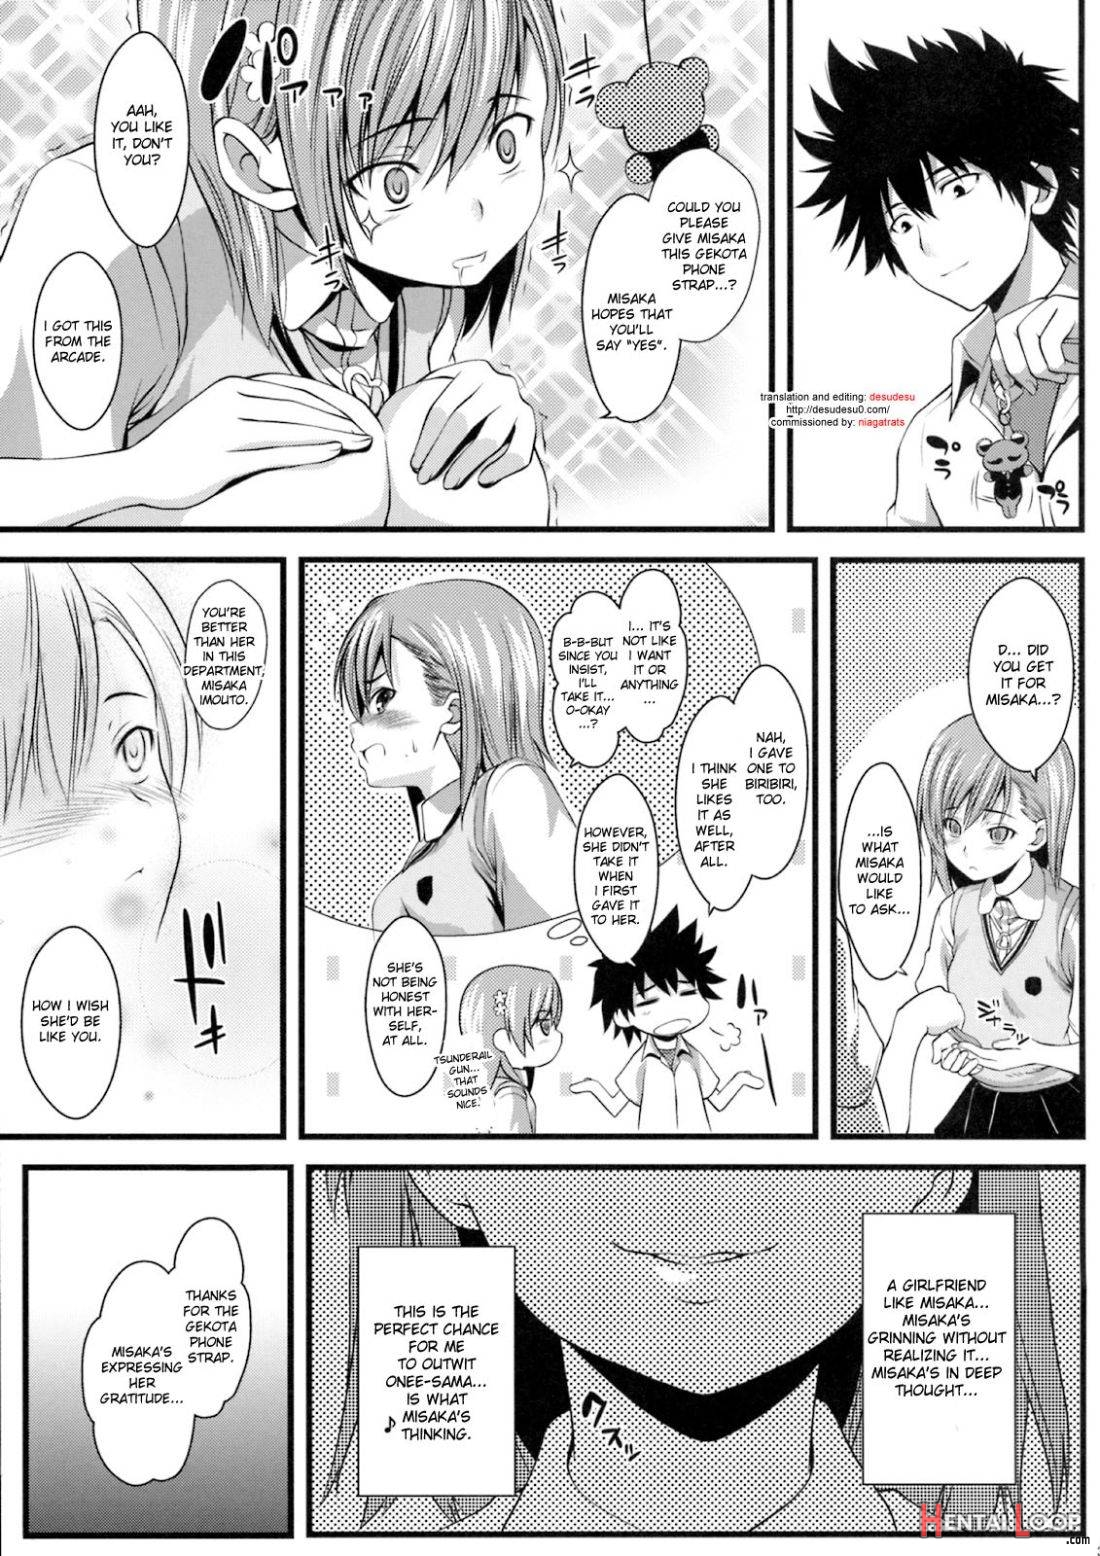 Gekota Max!! page 2